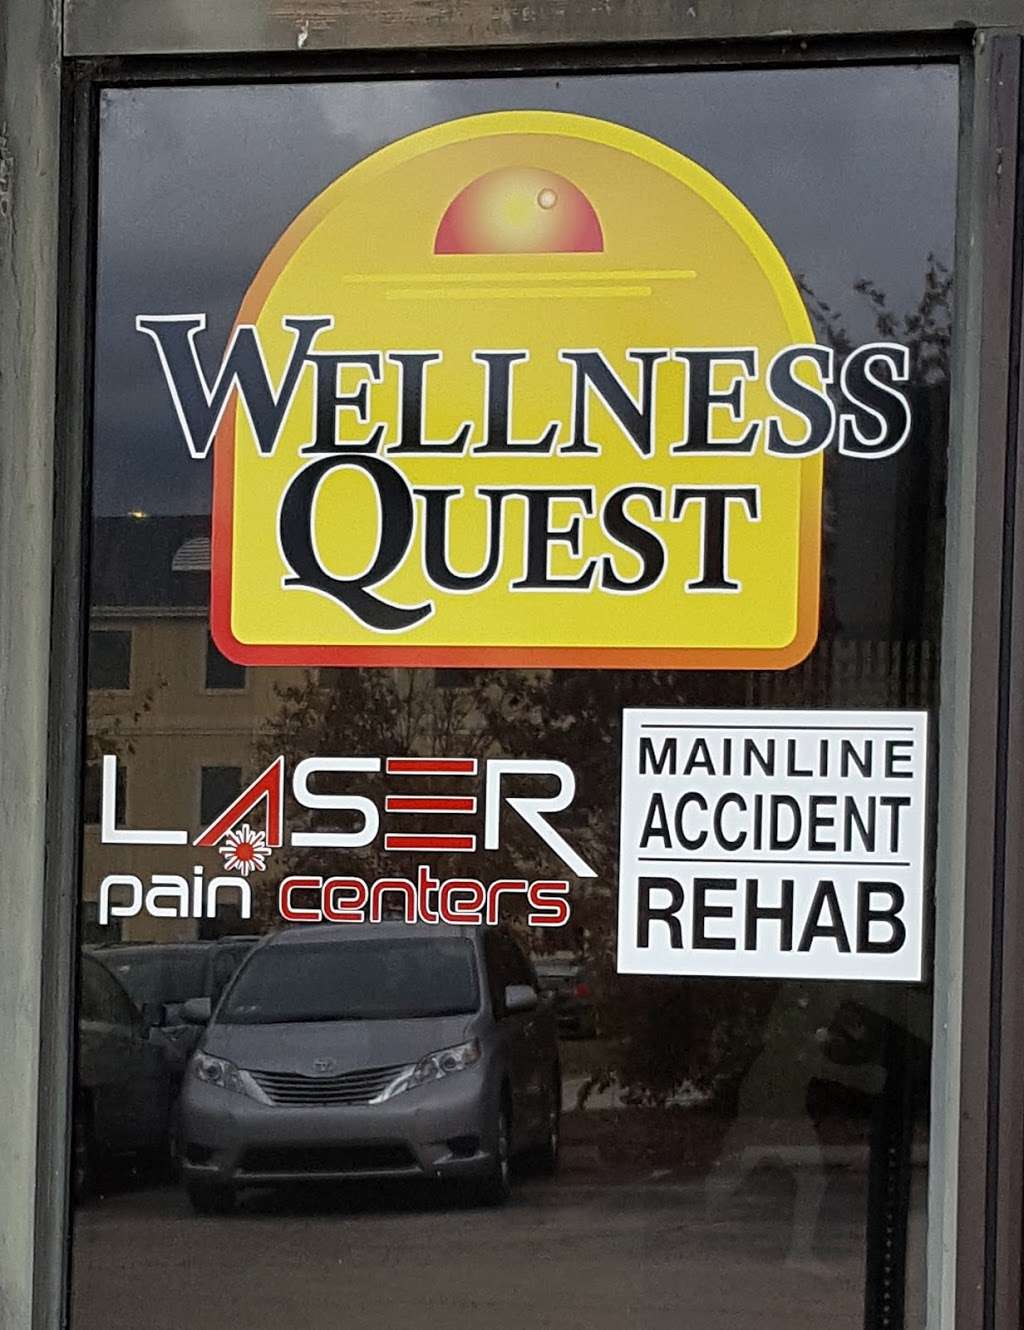 Laser Pain Centers | 970 Pulaski Dr, King of Prussia, PA 19406, USA | Phone: (610) 640-9355